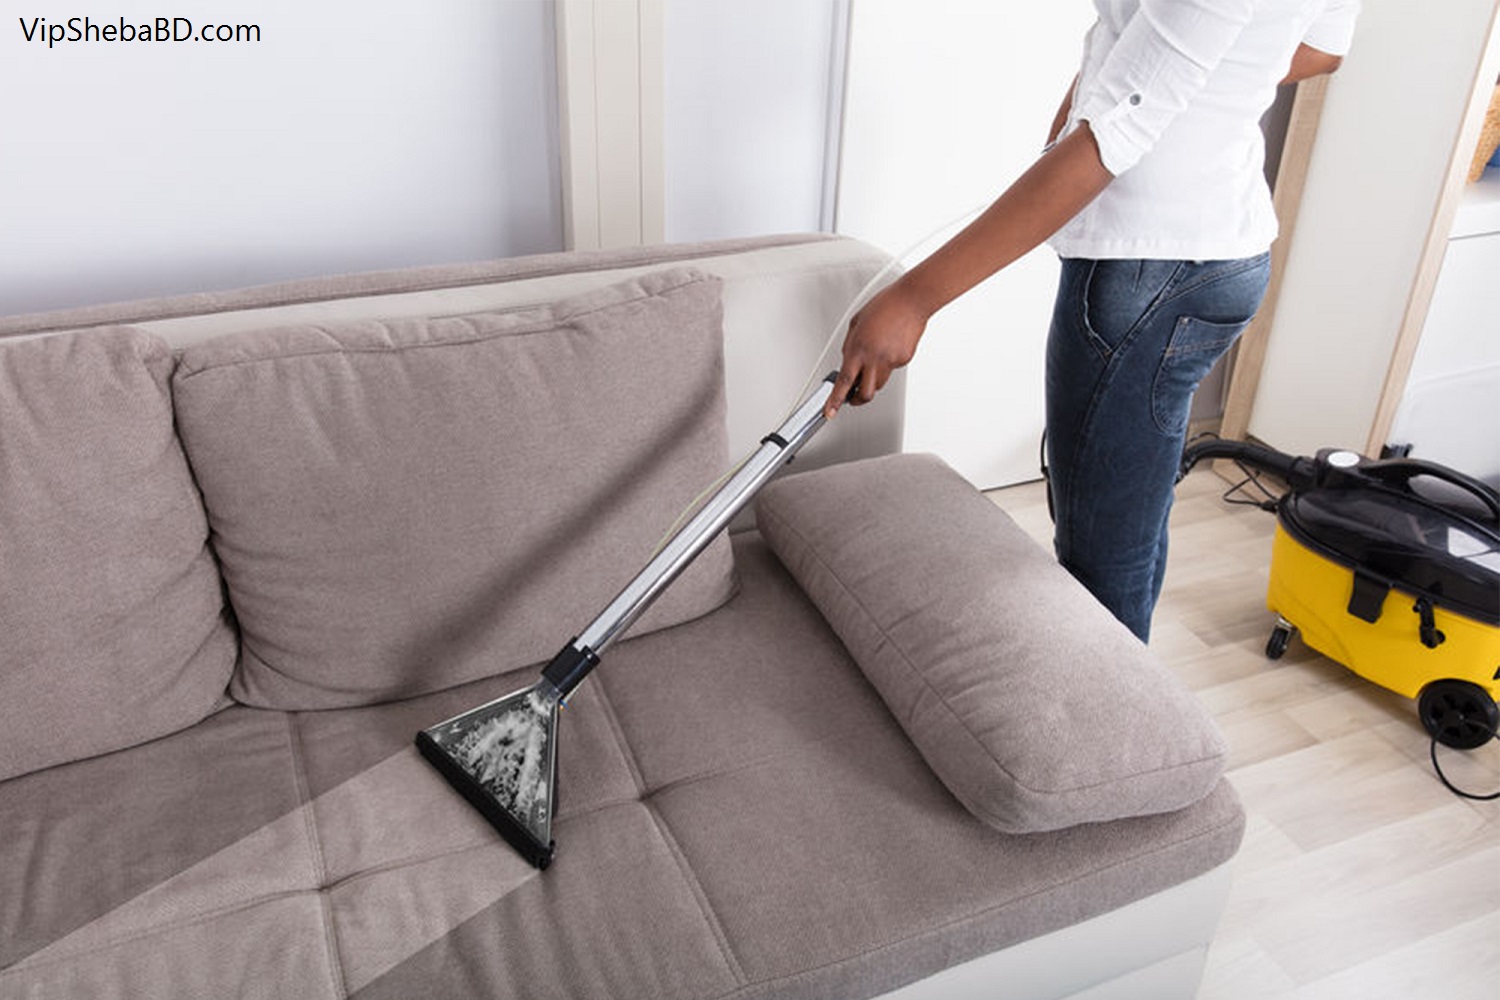 Complete Carpet and Upholstery Cleaning - Hinckley, Leicestershire